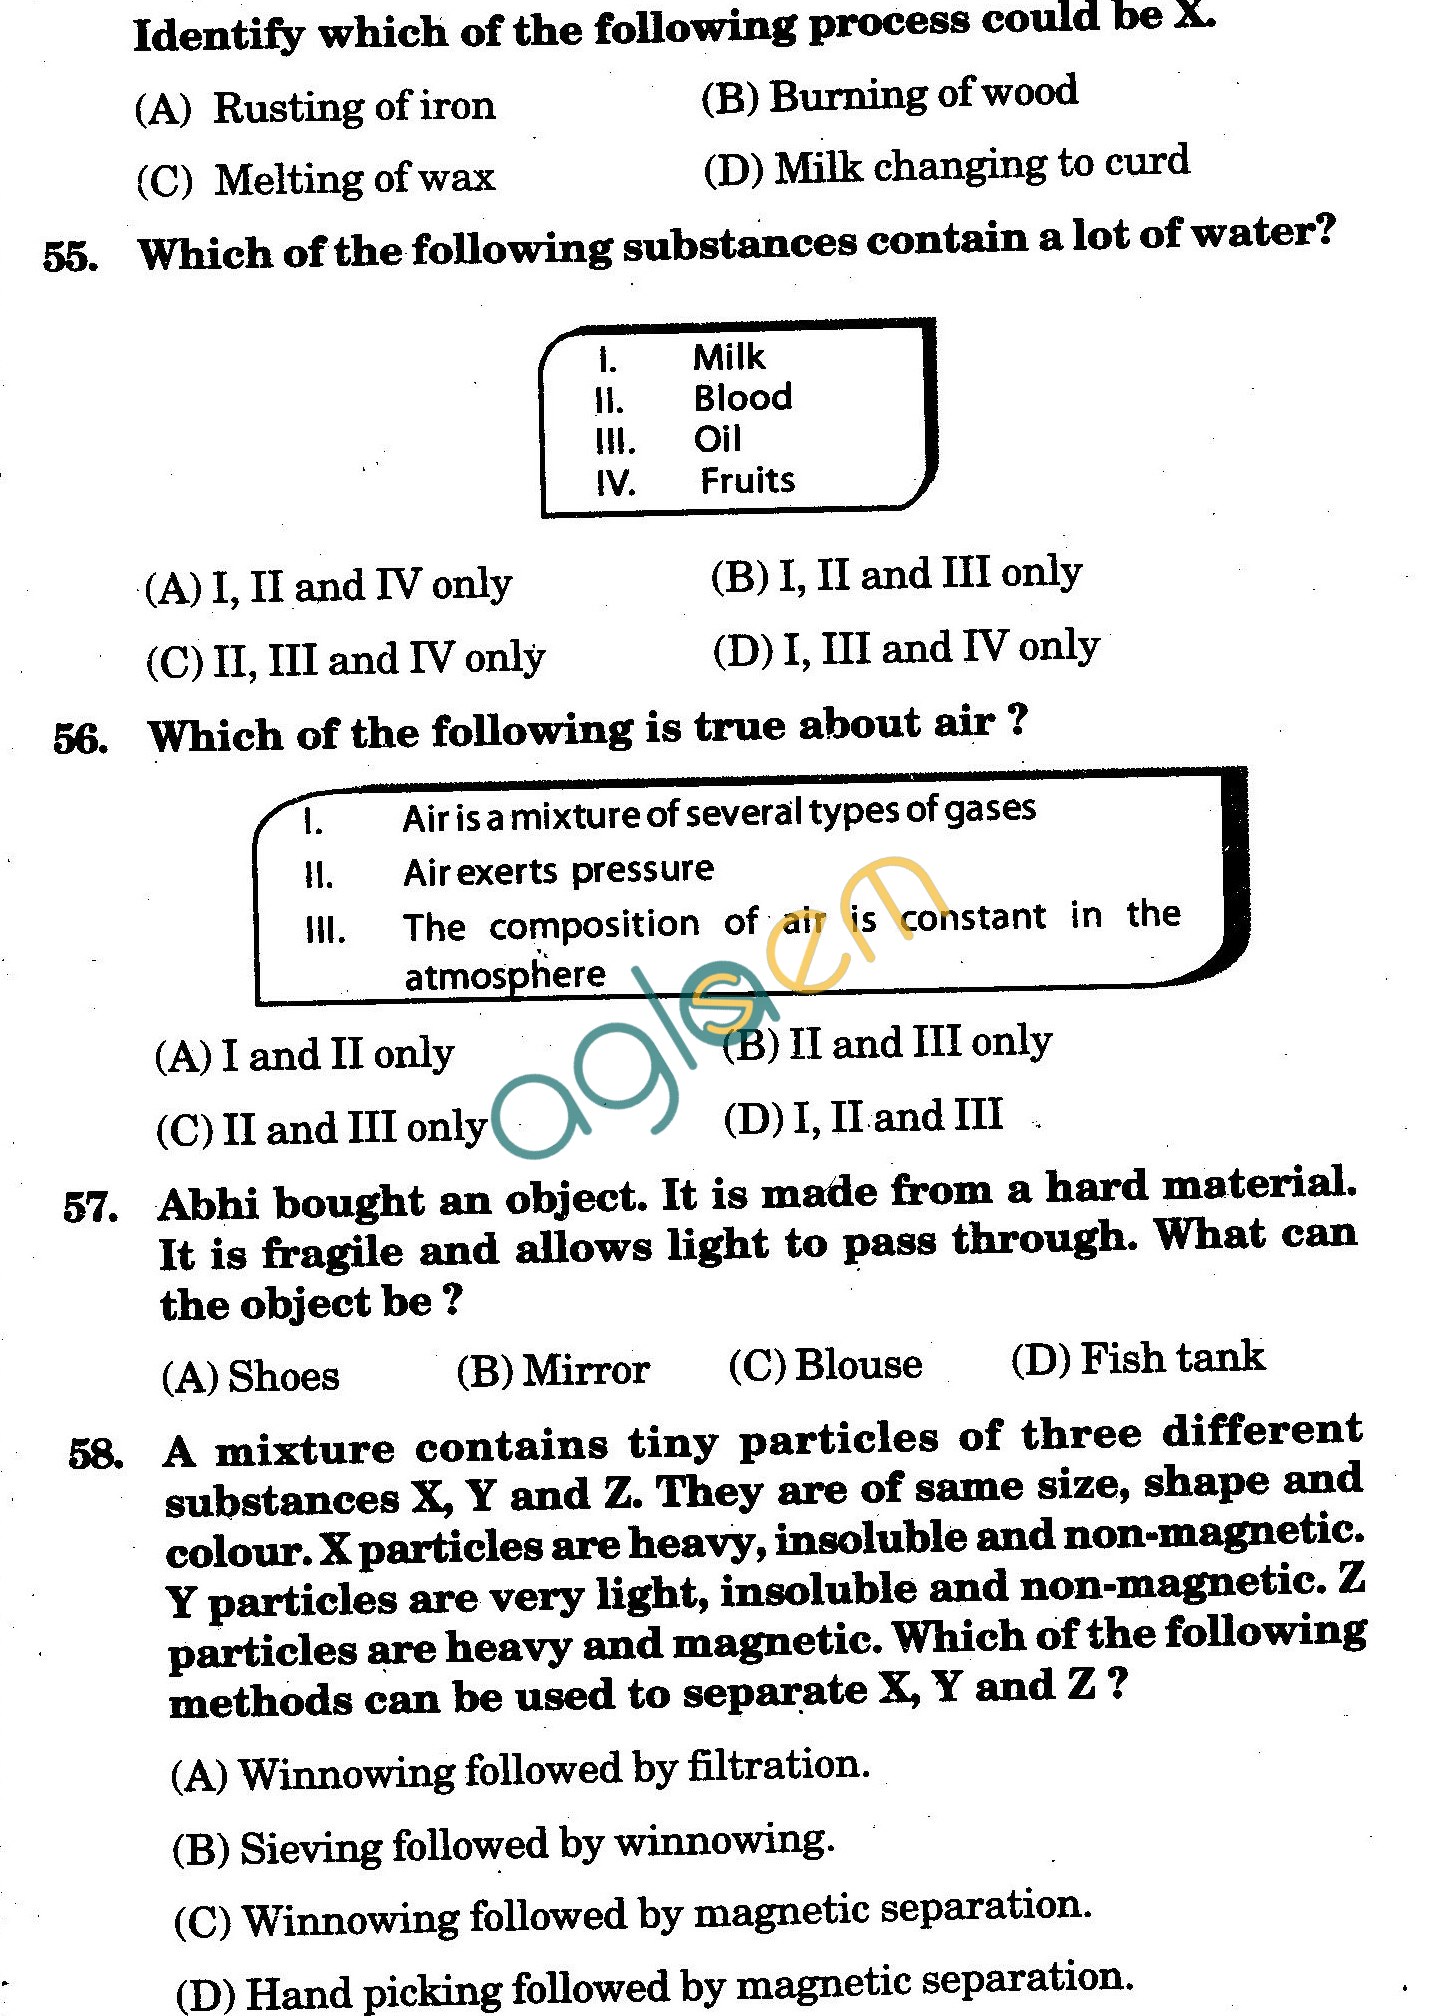 NSTSE 2010: Class VI Question Paper with Answers - Chemistry